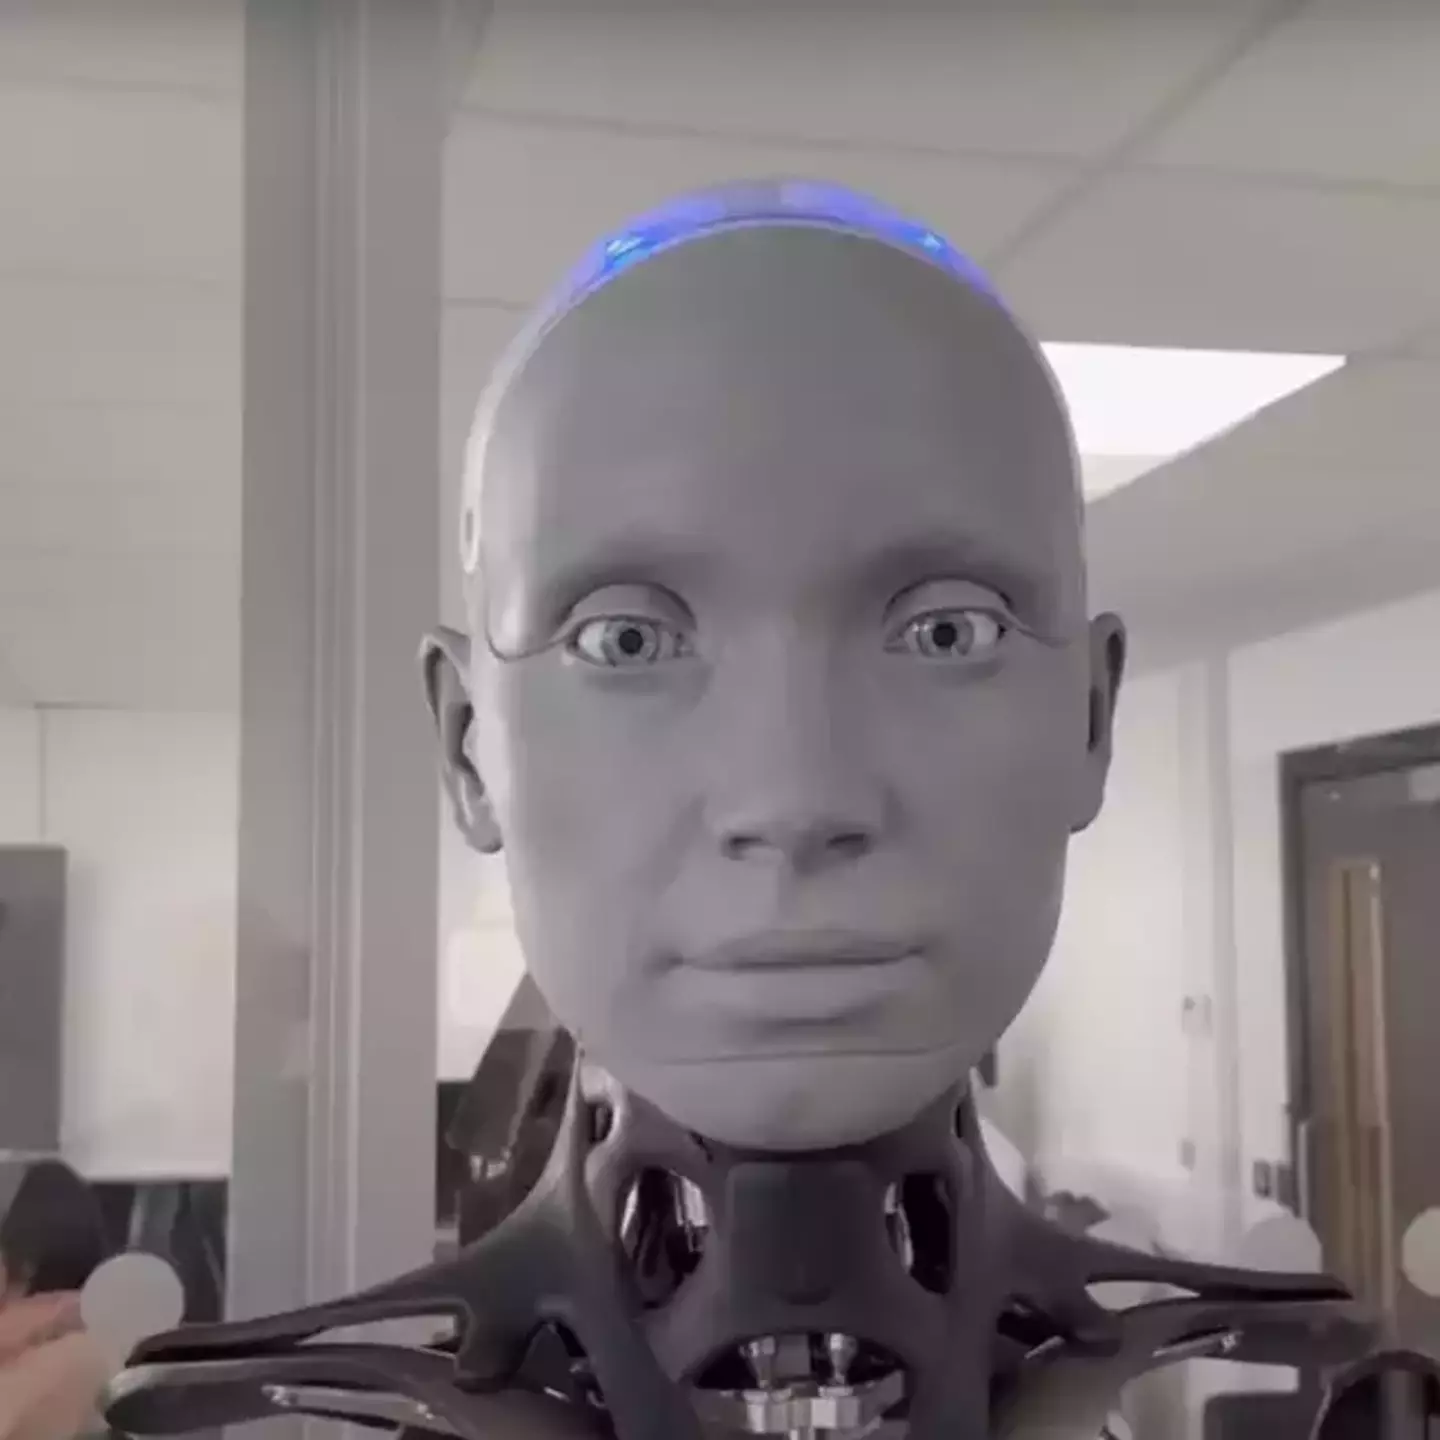 Ameca the robot has an optimistic prediction for the future of humanity.